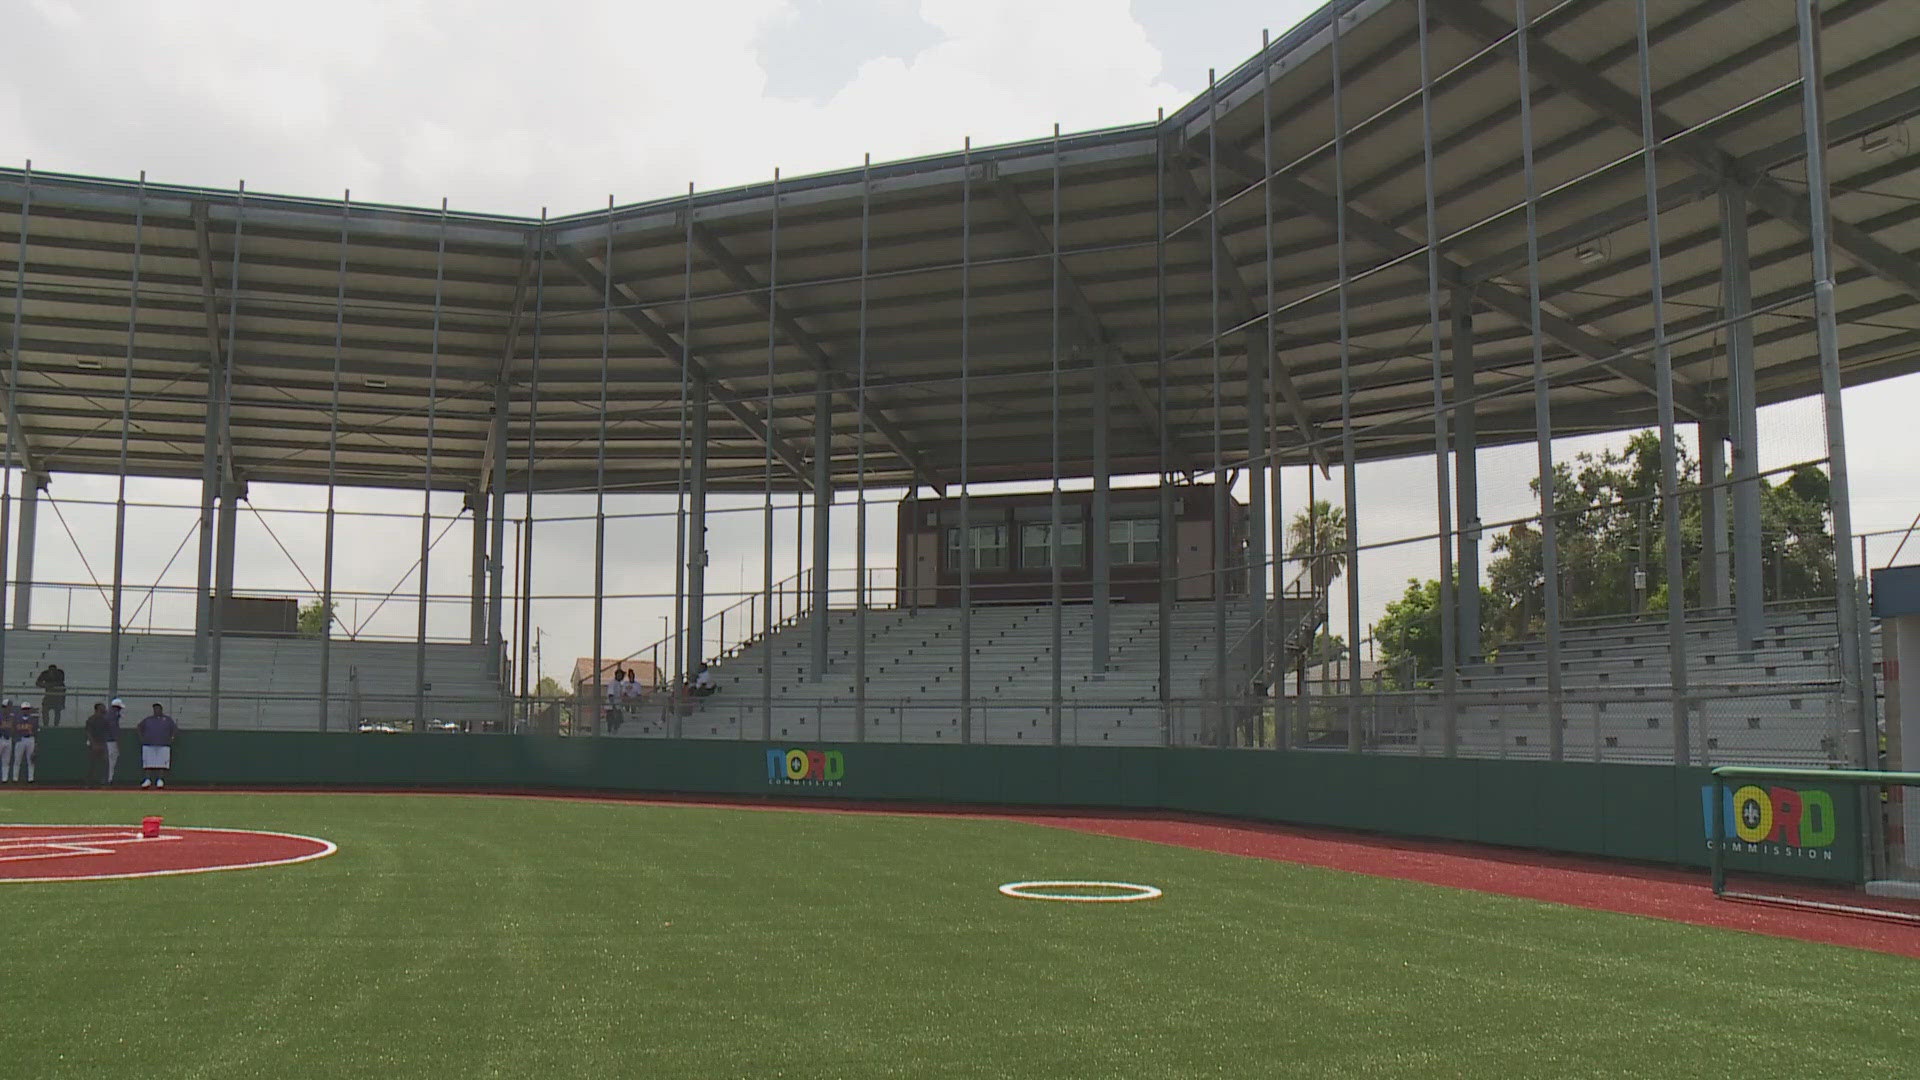 For the first time since Hurricane Katrina, the West Bank of New Orleans will have a public baseball stadium.